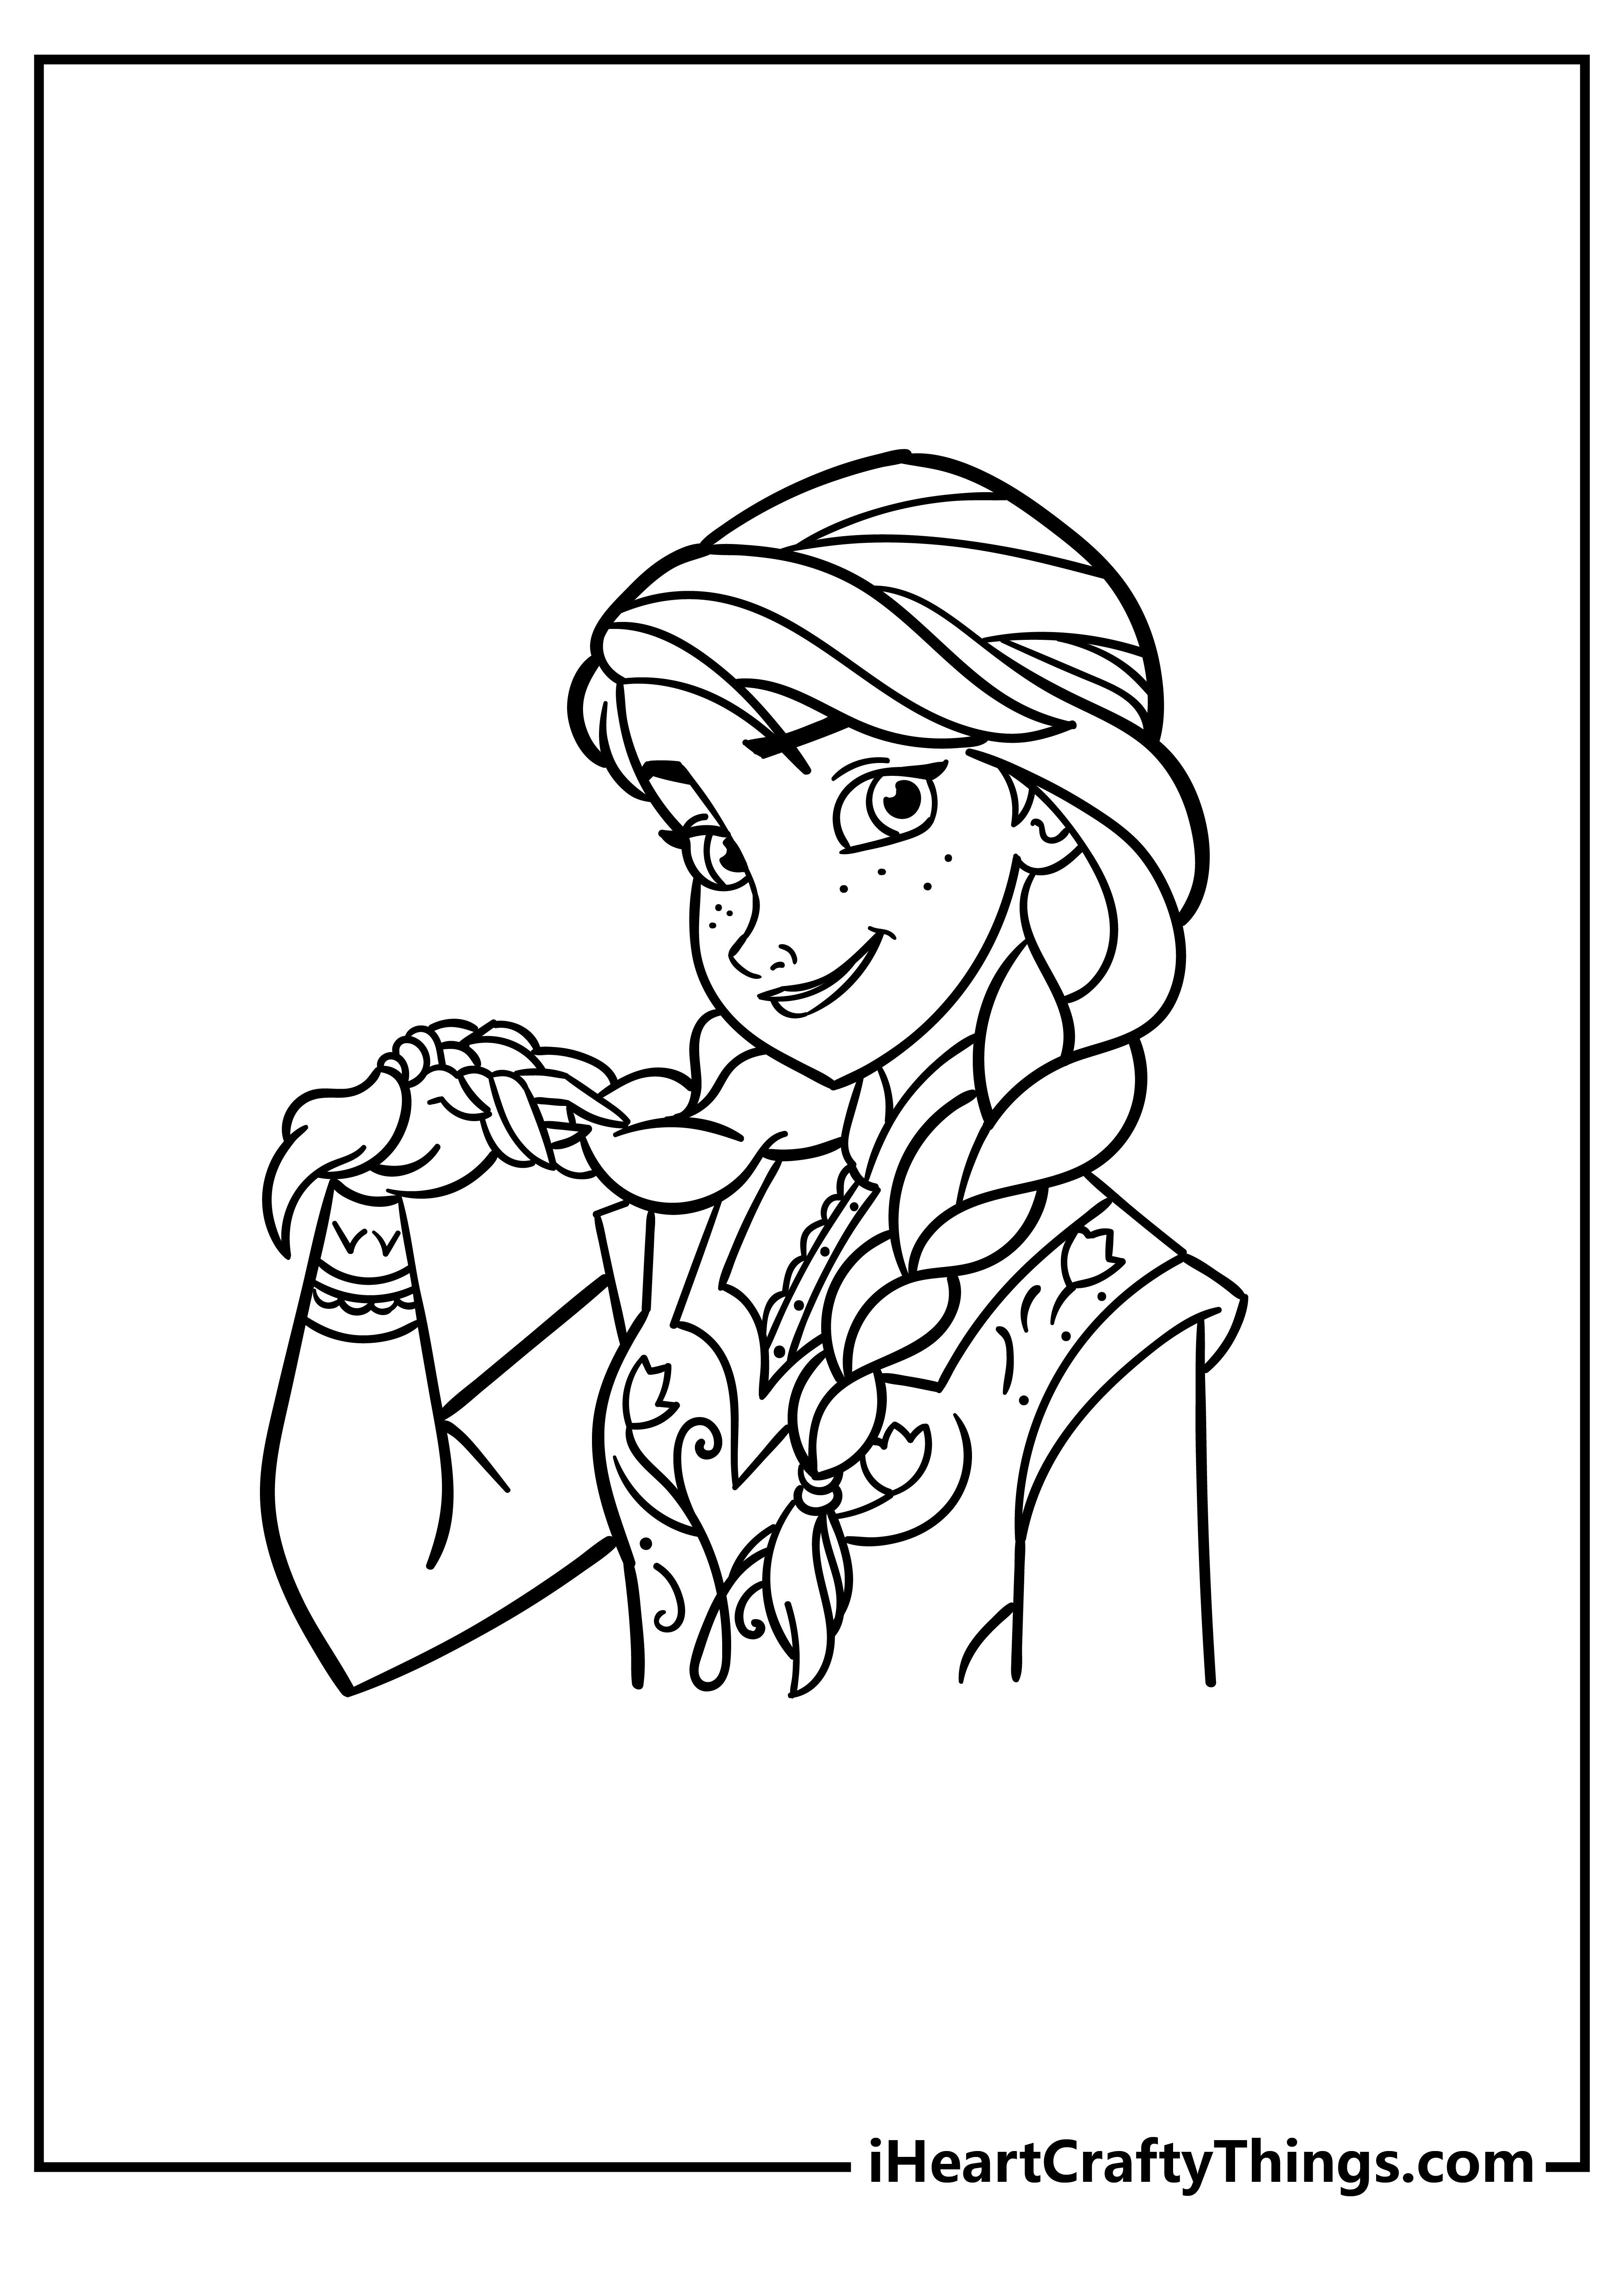 Anna Coloring Pages free pdf download